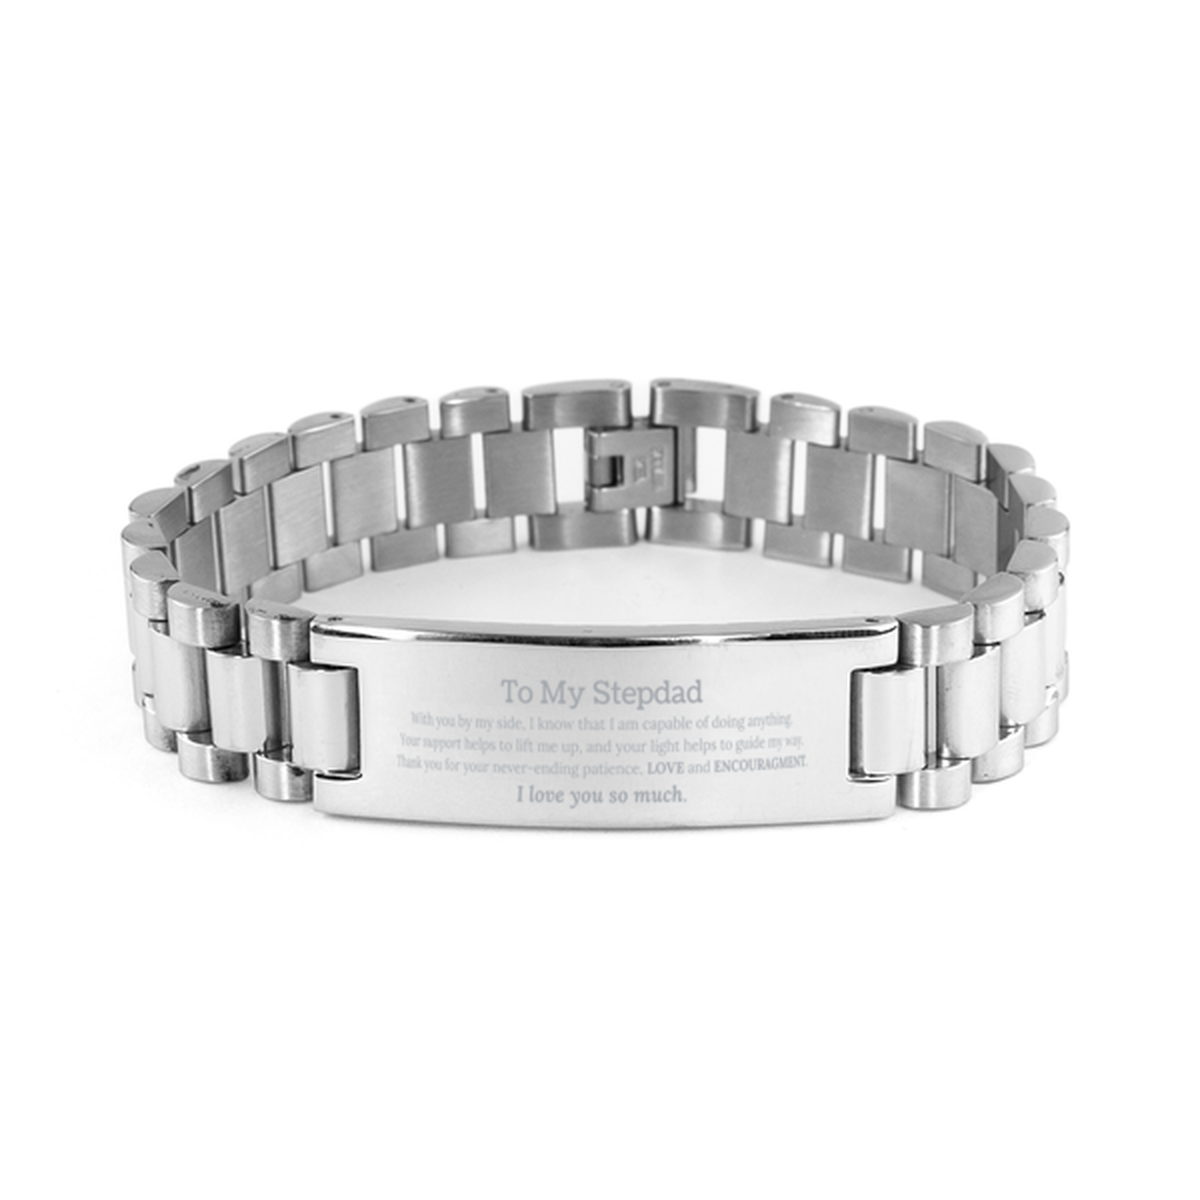 Appreciation Stepdad Ladder Stainless Steel Bracelet Gifts, To My Stepdad Birthday Christmas Wedding Keepsake Gifts for Stepdad With you by my side, I know that I am capable of doing anything. I love you so much